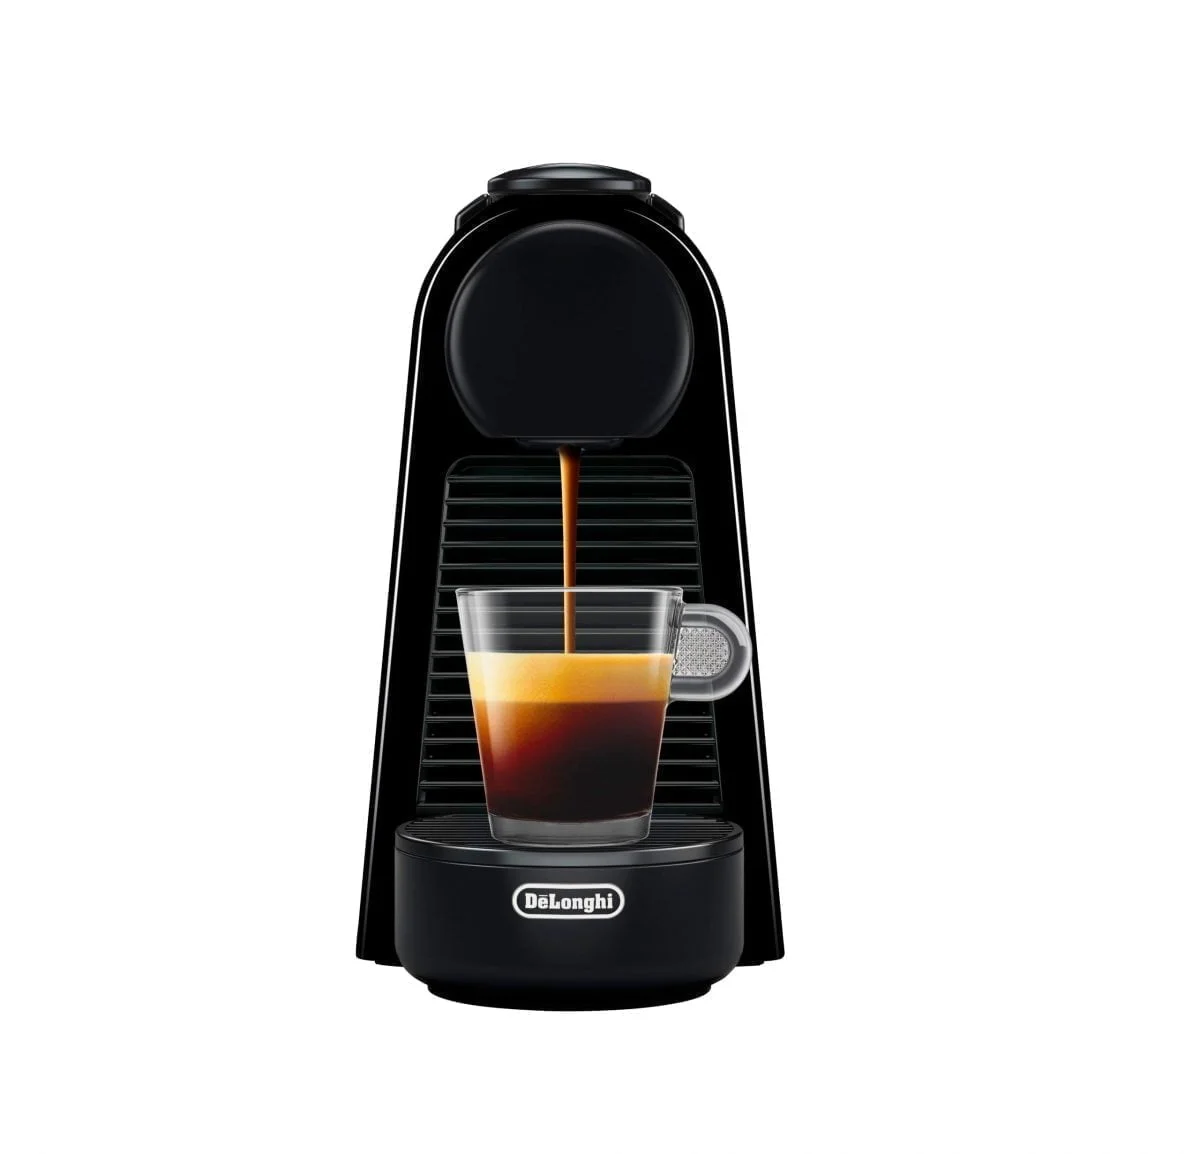 5934817Cv1D Scaled Nespresso &Amp;Lt;H1&Amp;Gt;Nespresso Delonghi Essenza Mini En85.B Black&Amp;Lt;/H1&Amp;Gt; Compact Without Compromise &Amp;Lt;Div Class=&Amp;Quot;Long-Description-Container Body-Copy &Amp;Quot;&Amp;Gt; &Amp;Lt;Div Class=&Amp;Quot;Html-Fragment&Amp;Quot;&Amp;Gt; &Amp;Lt;Div&Amp;Gt;The Essenza Mini Espresso Machine Brews 2 Single-Serve Cup Sizes All With Just One-Touch Of A Button. Each Machine Includes A Complimentary Nespresso Original Capsule Sampling Pack With A Range Of Capsules With Unique Aroma Profiles.&Amp;Lt;/Div&Amp;Gt; &Amp;Lt;/Div&Amp;Gt; &Amp;Lt;Div&Amp;Gt; &Amp;Lt;H4&Amp;Gt;Warranty : 1 Year (Shipping Not Included)&Amp;Lt;/H4&Amp;Gt; &Amp;Lt;/Div&Amp;Gt; &Amp;Lt;/Div&Amp;Gt; Nespresso Delonghi Essenza Mini Nespresso Delonghi Essenza Mini En85.B Black (14 Capsules Included)